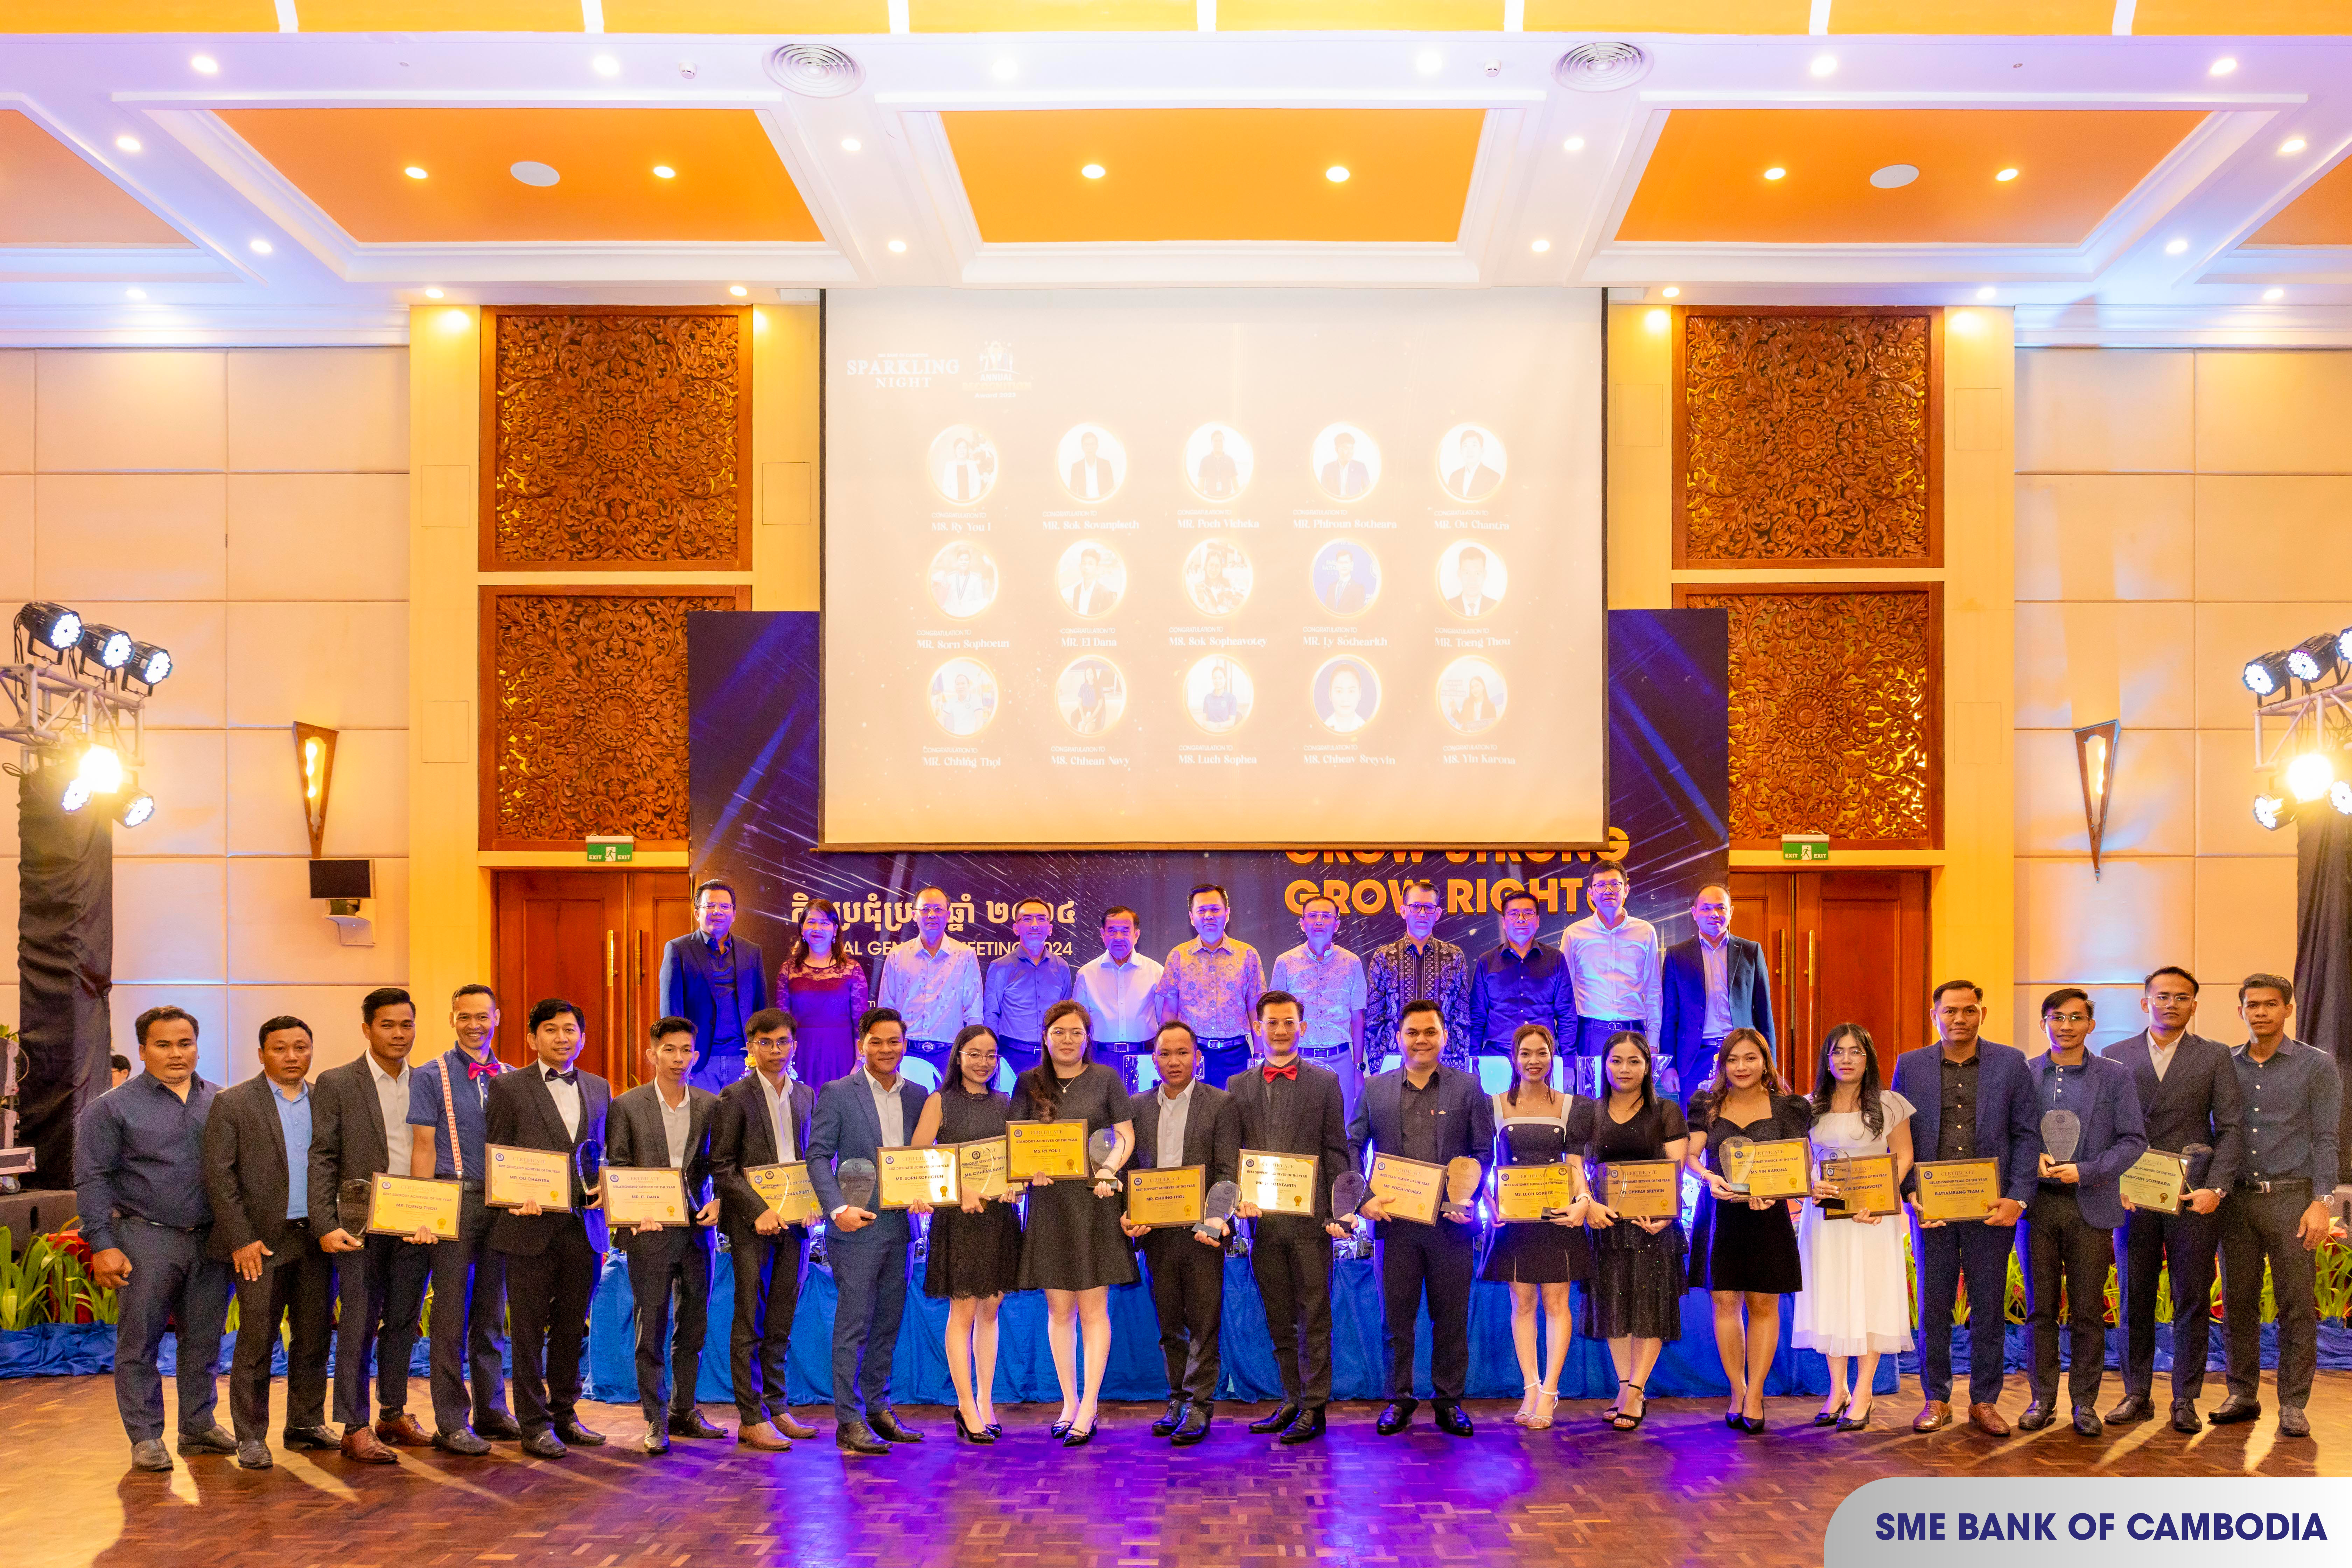 SME Bank of Cambodia held its Annual Gala Dinner under the theme of “Sparkling Night”